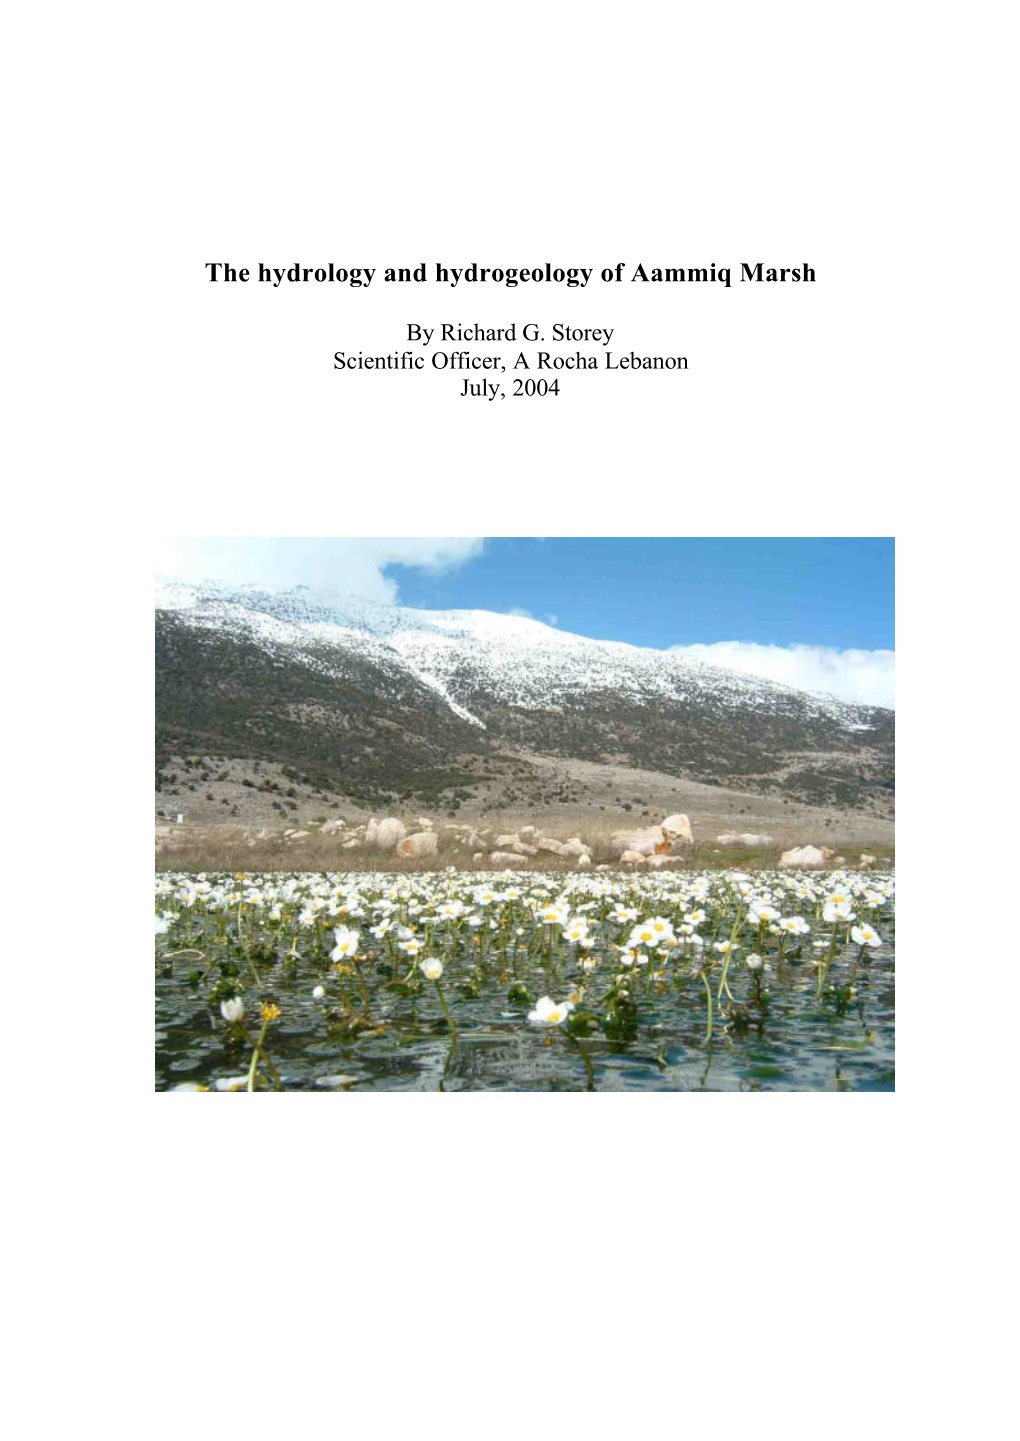 The Hydrology and Hydrogeology of Aammiq Marsh